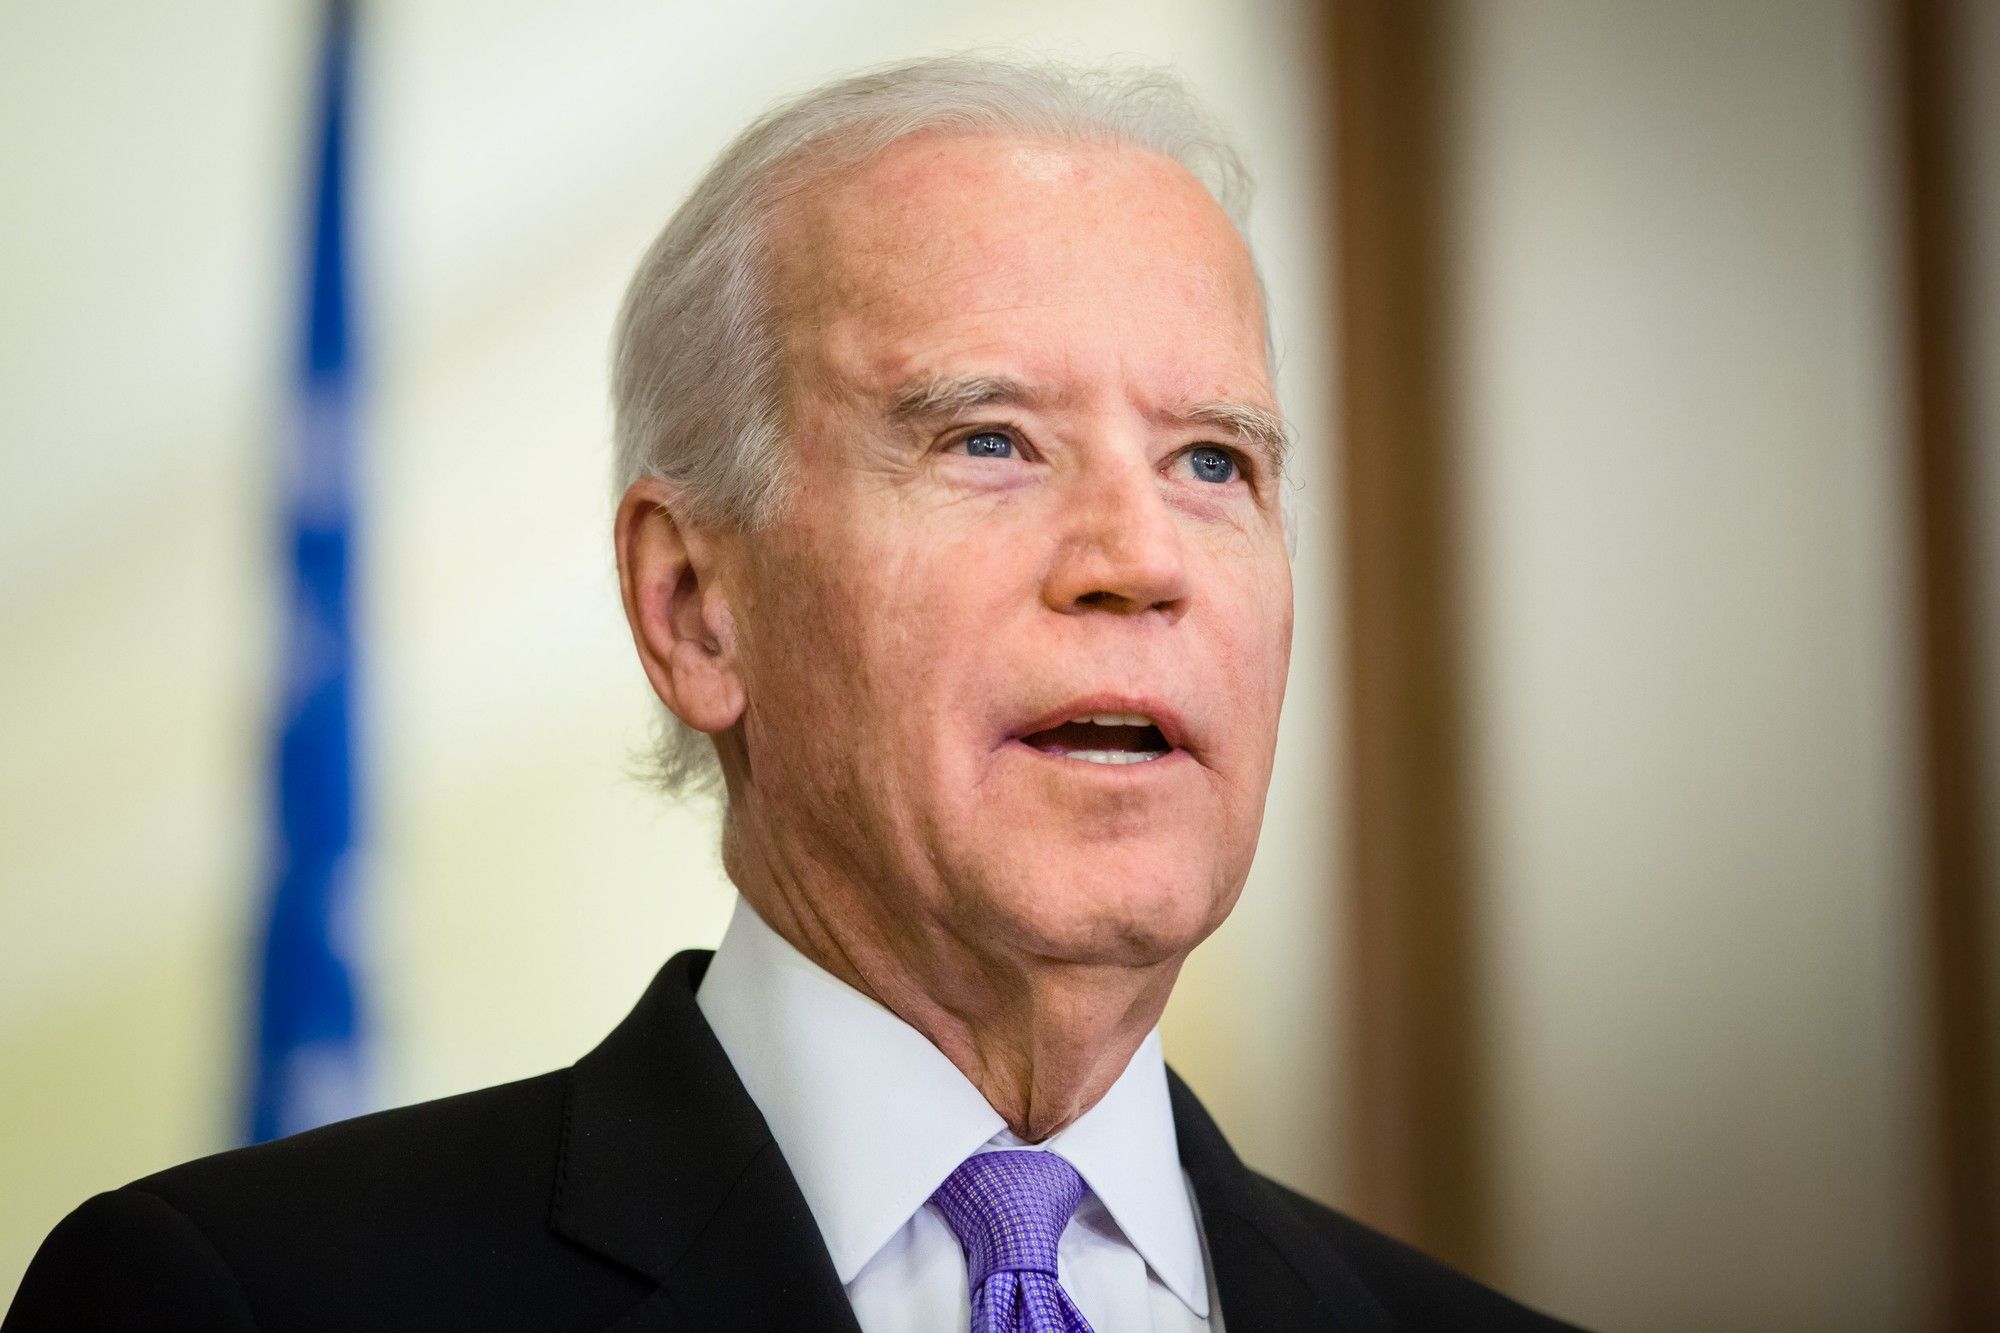 What will the Joe Biden presidency look like for consumers?